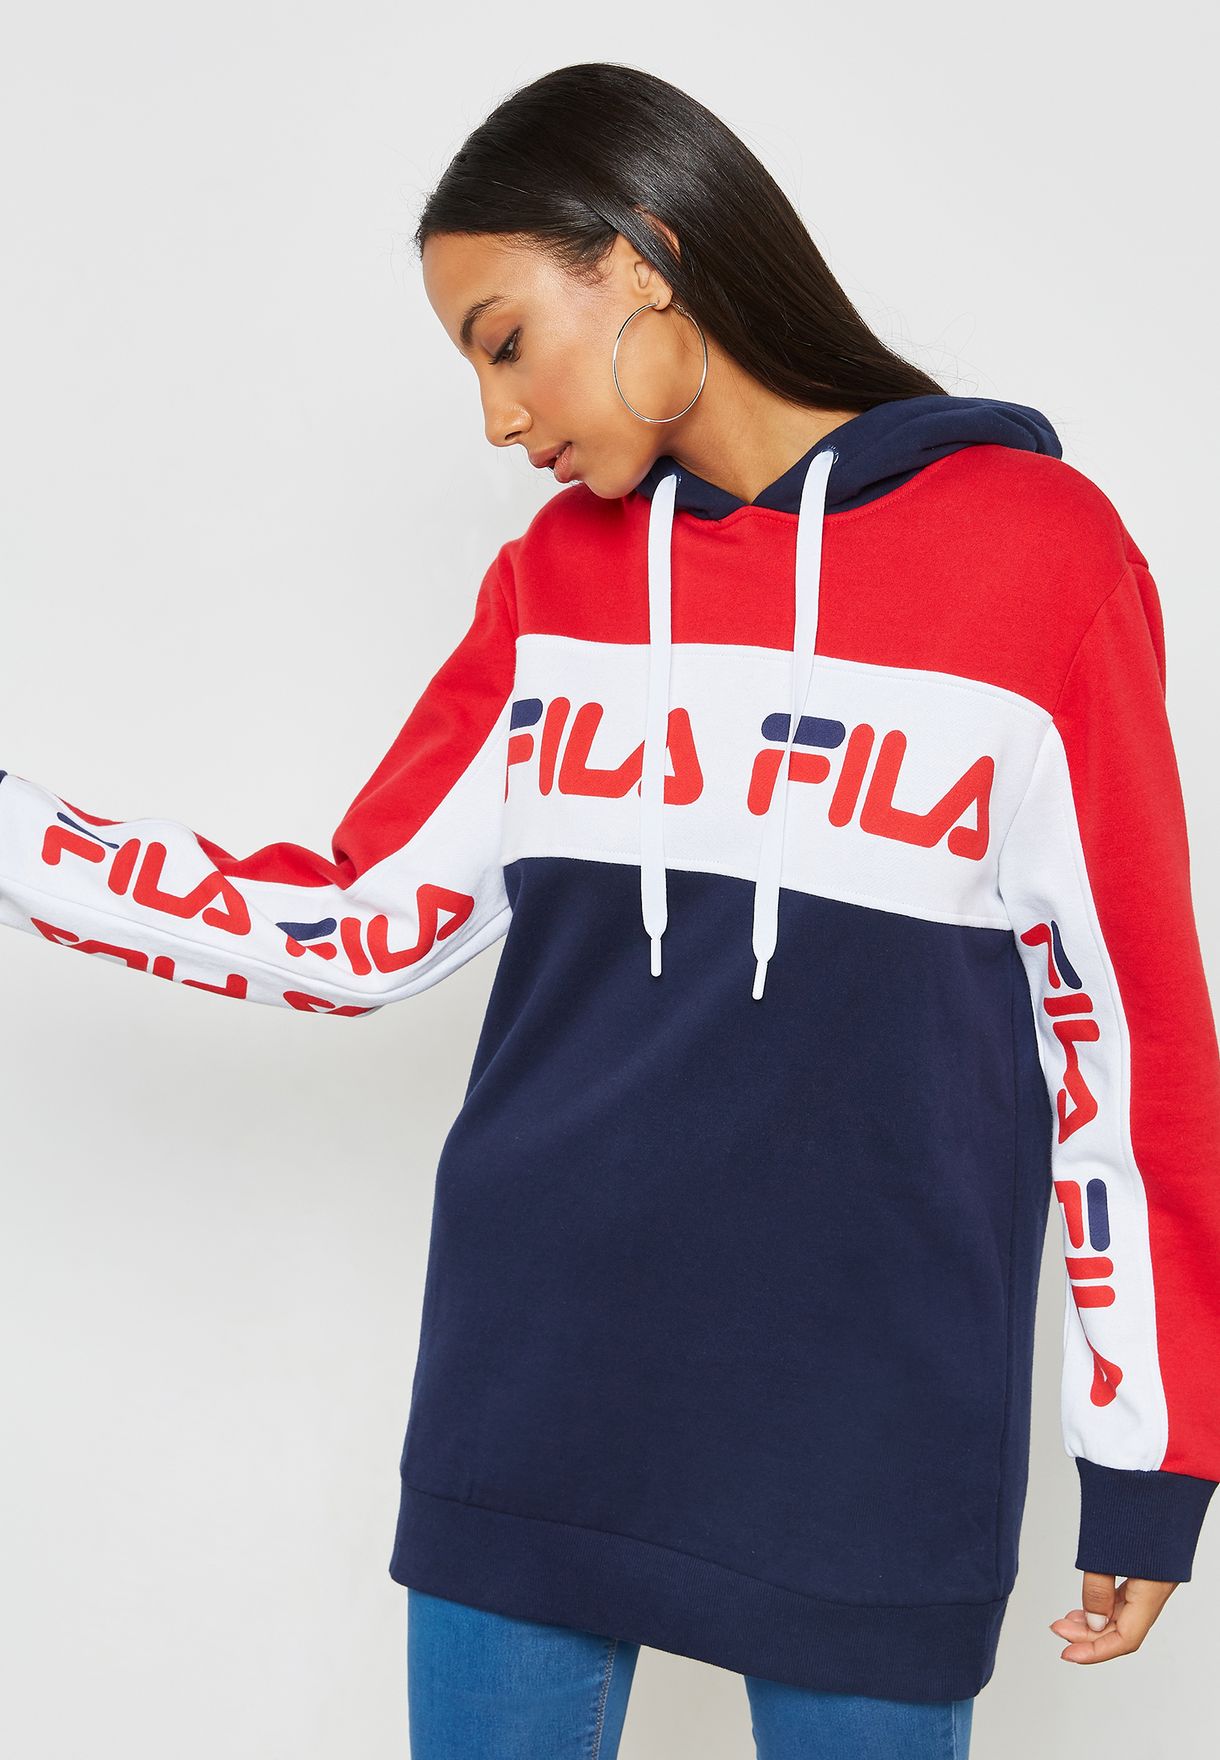 fila clothes for girls